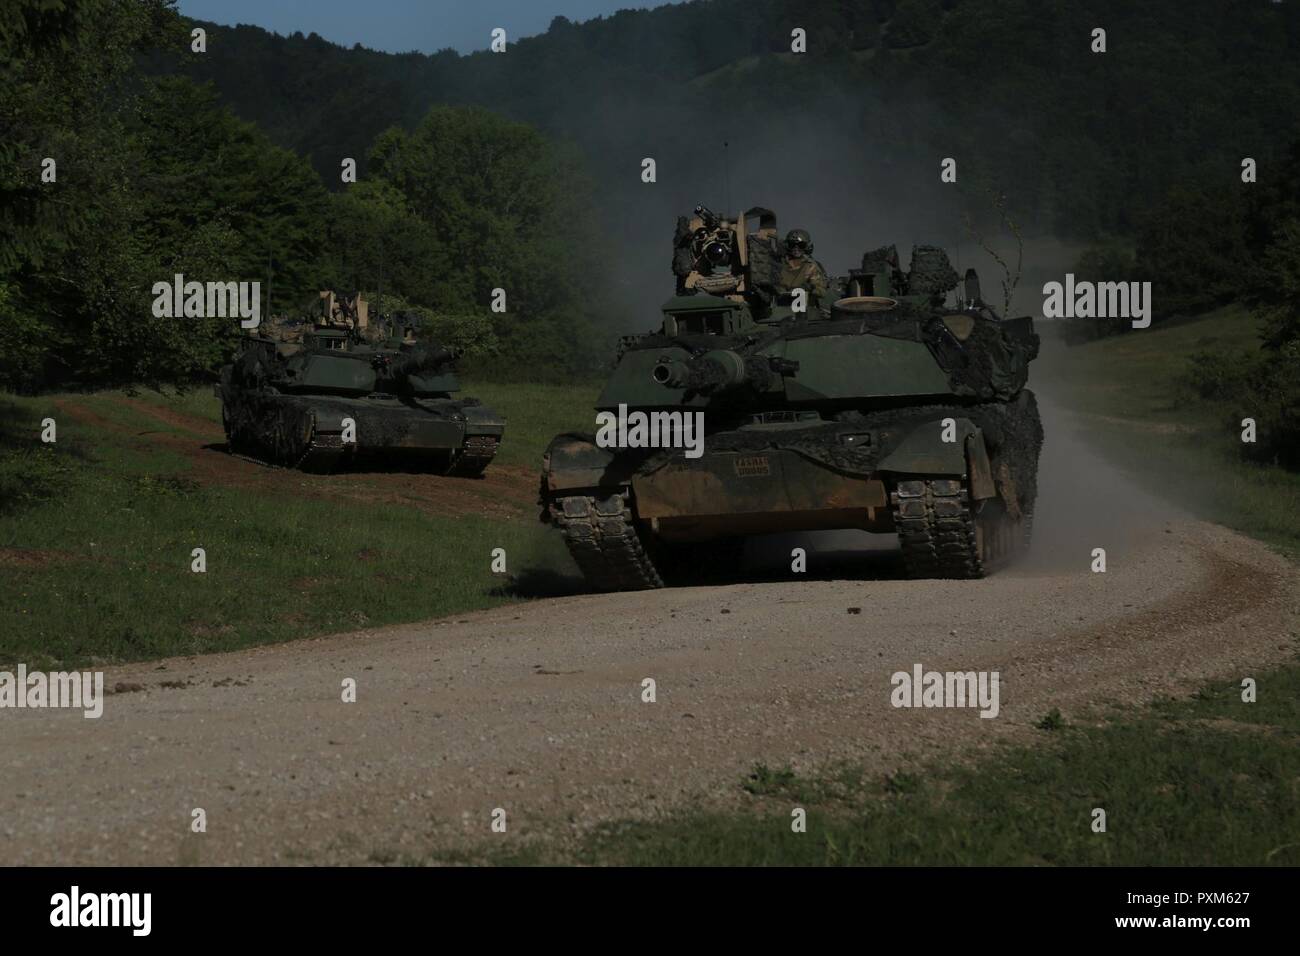 U.S. Soldiers of Ares Company, 166th Armored Regiment, 4th Infantry Division bound with M1A2 Abrams Main Battle Tanks while conducting a tactical movement during Exercise Combined Resolve VIII at the Hohenfels Training Area, Hohenfels, Germany, June 9, 2017. Exercise Combined Resolve VIII is a multinational exercise designed to train the Army’s Regionally Allocated Forces to the U.S. European Command. Combined Resolve VIII will include more than 3,400 participants from 10 nations. The goal of the exercise is to prepare forces in Europe to operate together to promote stability and security in t Stock Photo